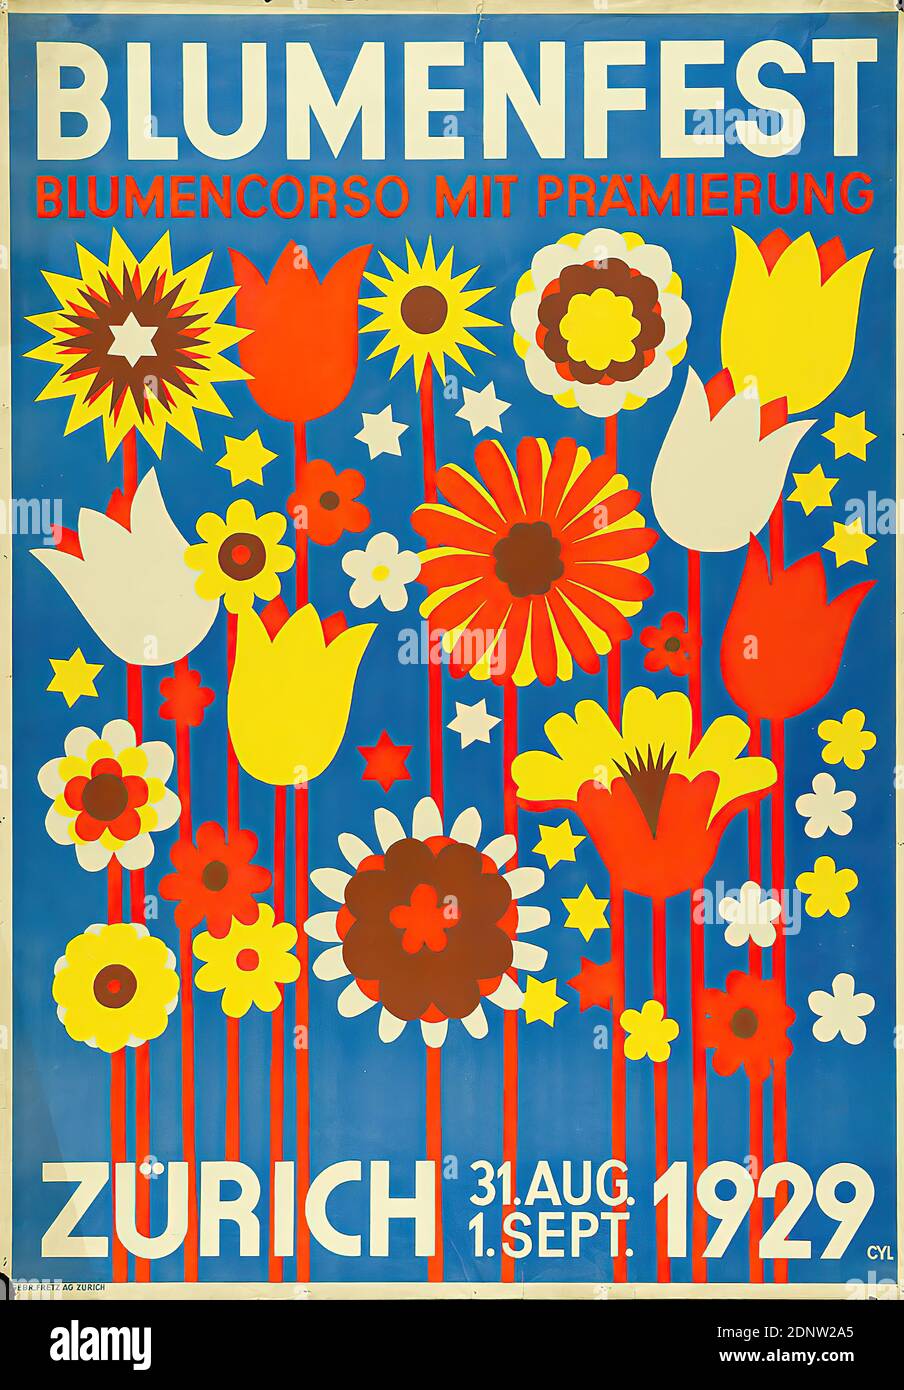 Walter Cyliax, Gebr. Fretz Graph. Workshops, Flower Festival. Flower parade with award ceremony. Zurich 1929, lithograph, total: height: 128.3 cm; width: 90.2 cm, monogrammed: bottom right in print: CYL, event posters, flowers Stock Photo